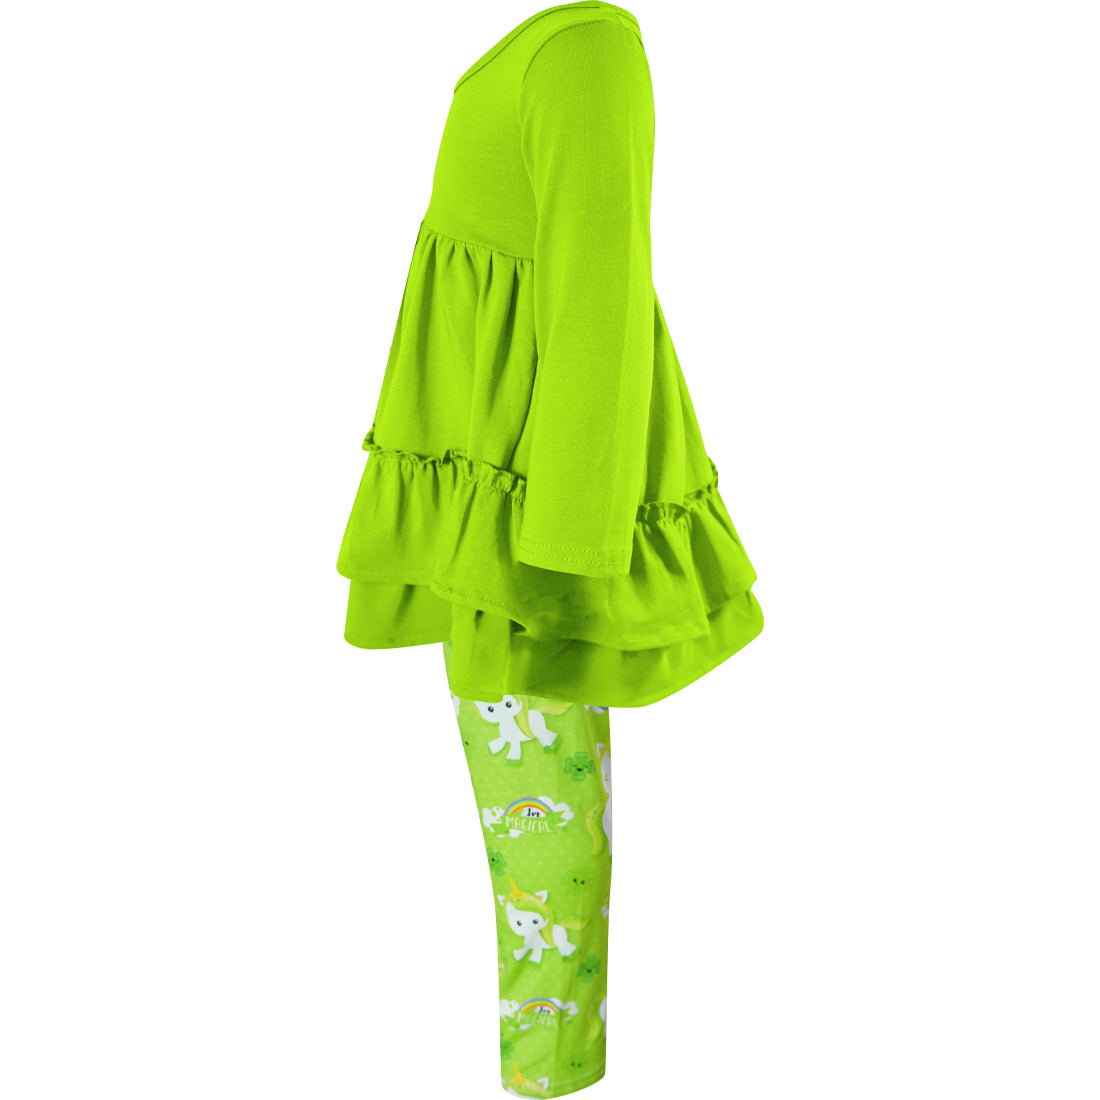 Toddler Girls St. Patricks Day Magical Unicorn Scarf Outfit - Lime - Angeline Kids